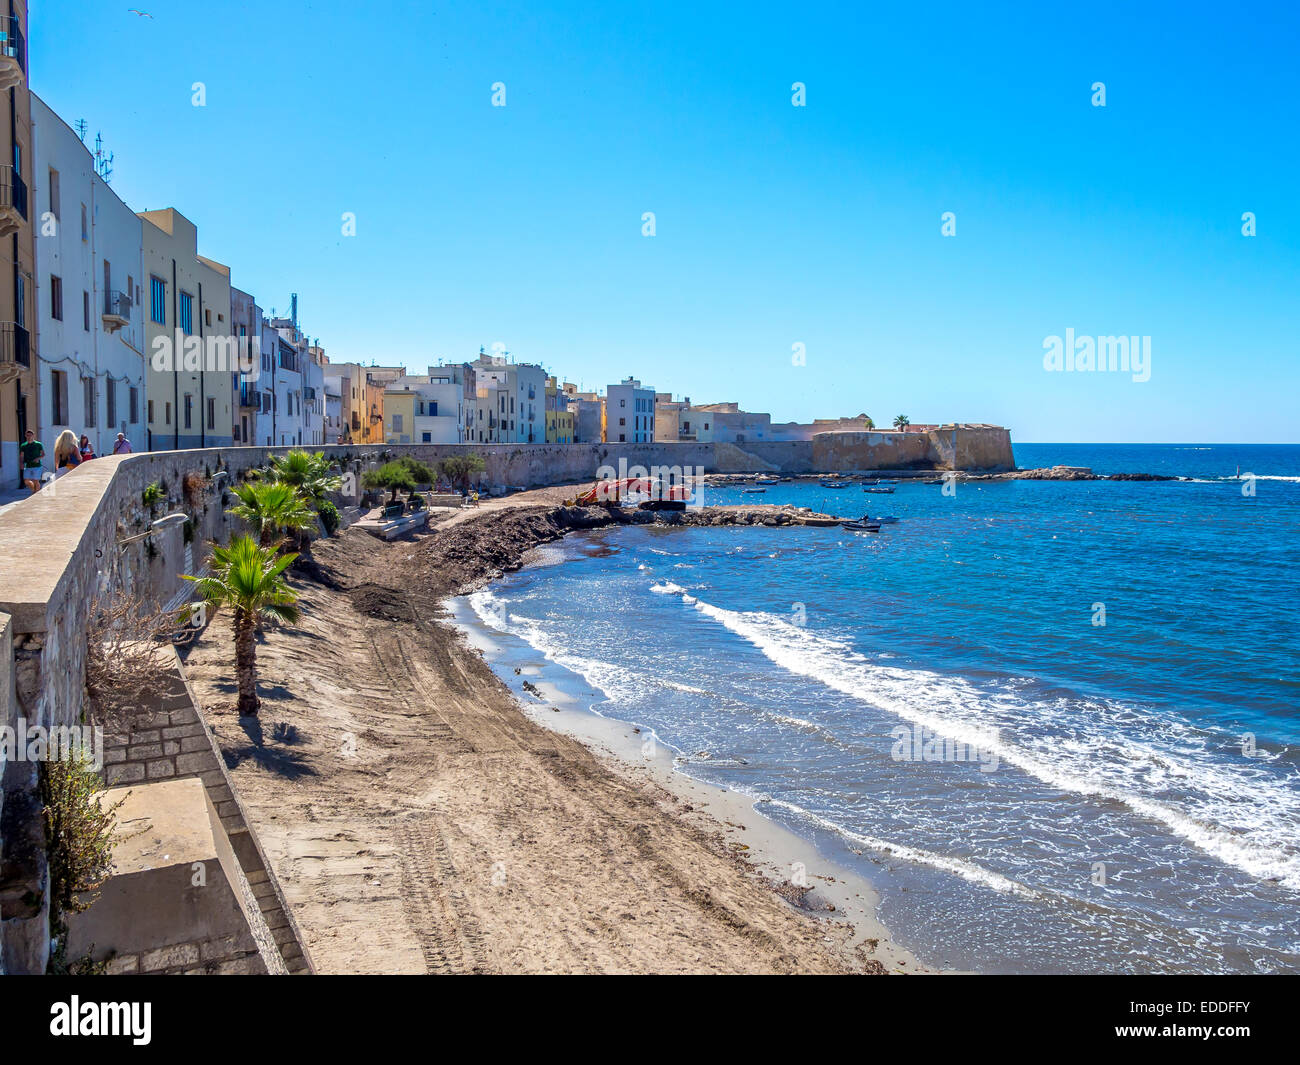 Italy, Sicily, Province of Trapani, Trapani, Old town, Beach and Via Mura di Tramontana Ovest Stock Photo